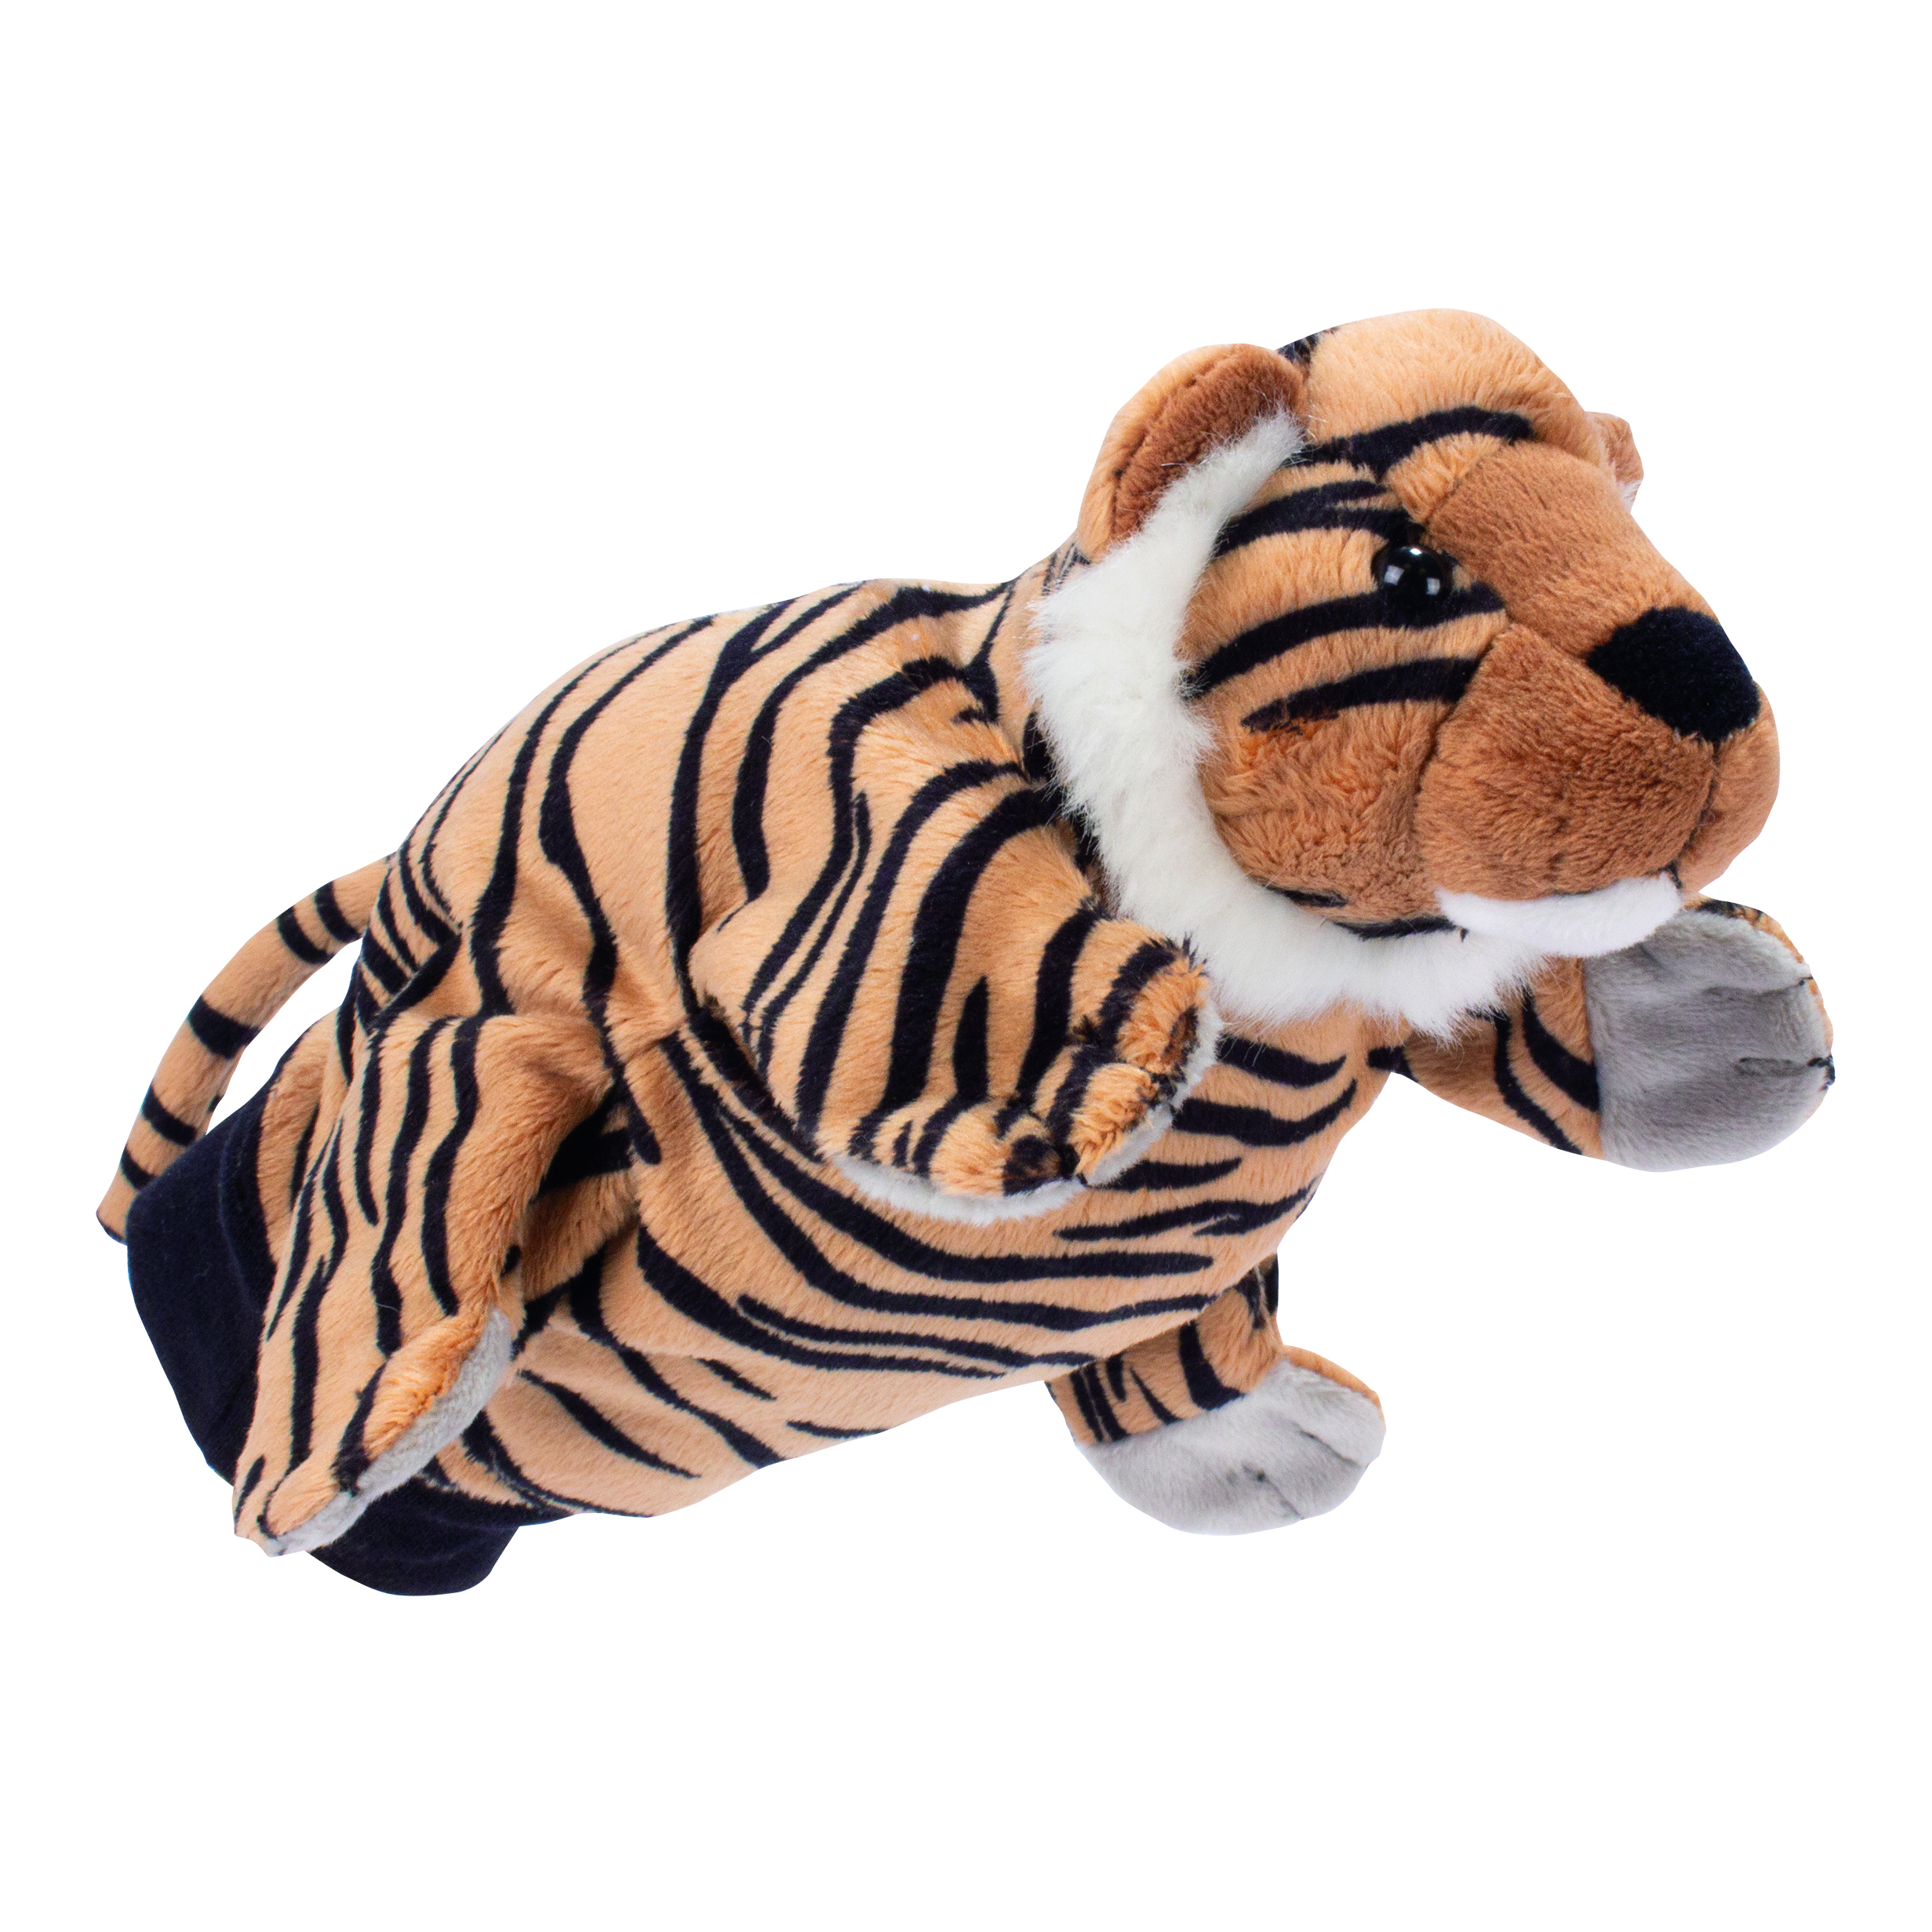 Hand puppet tiger - by Beleduc